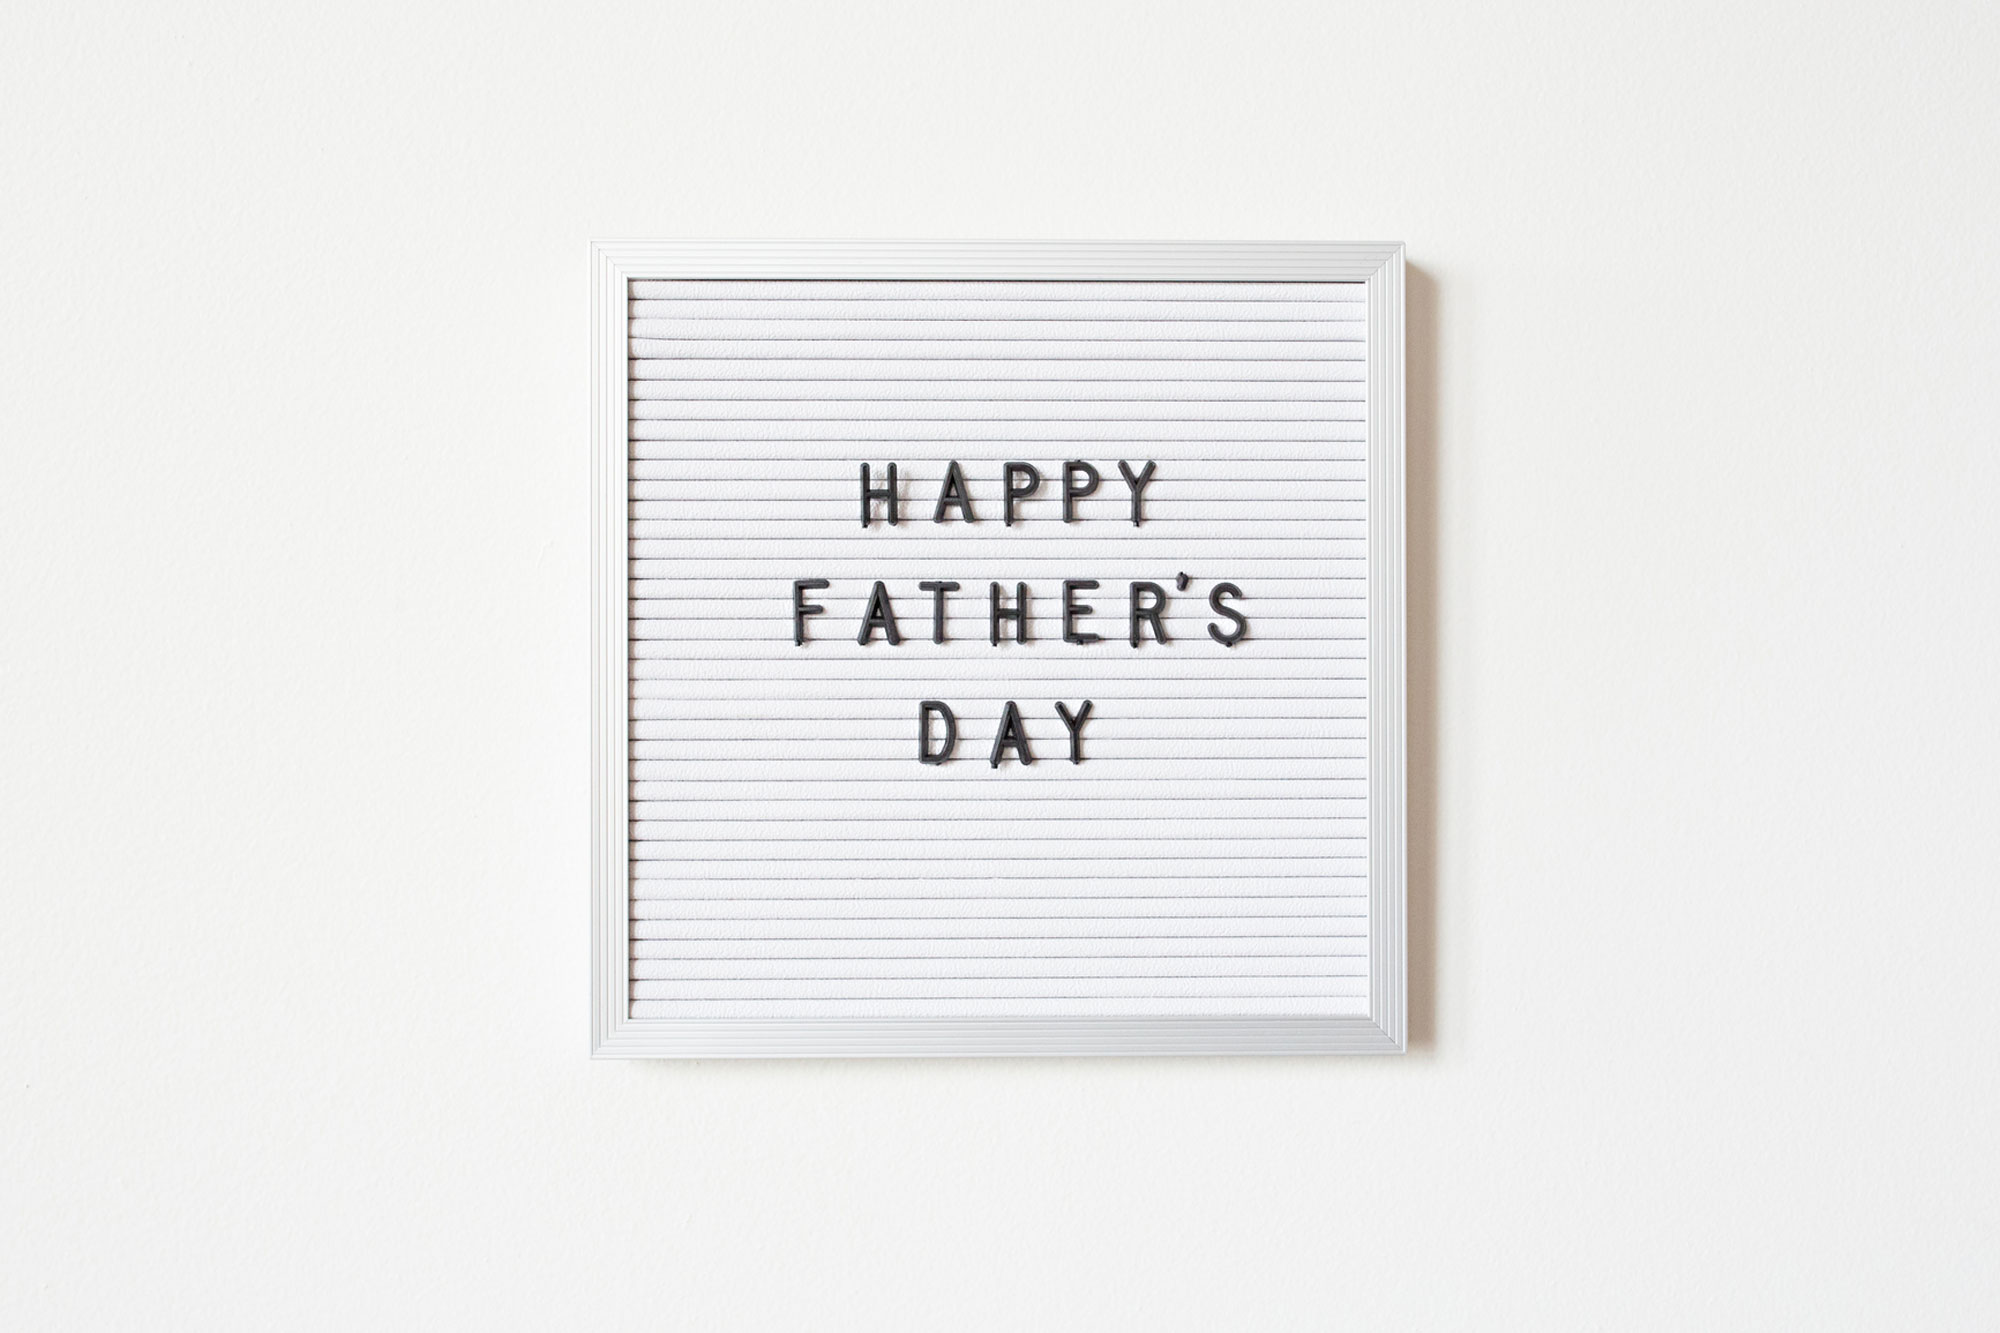 Happy Father's Day Letters and Words Spelled out on a Board